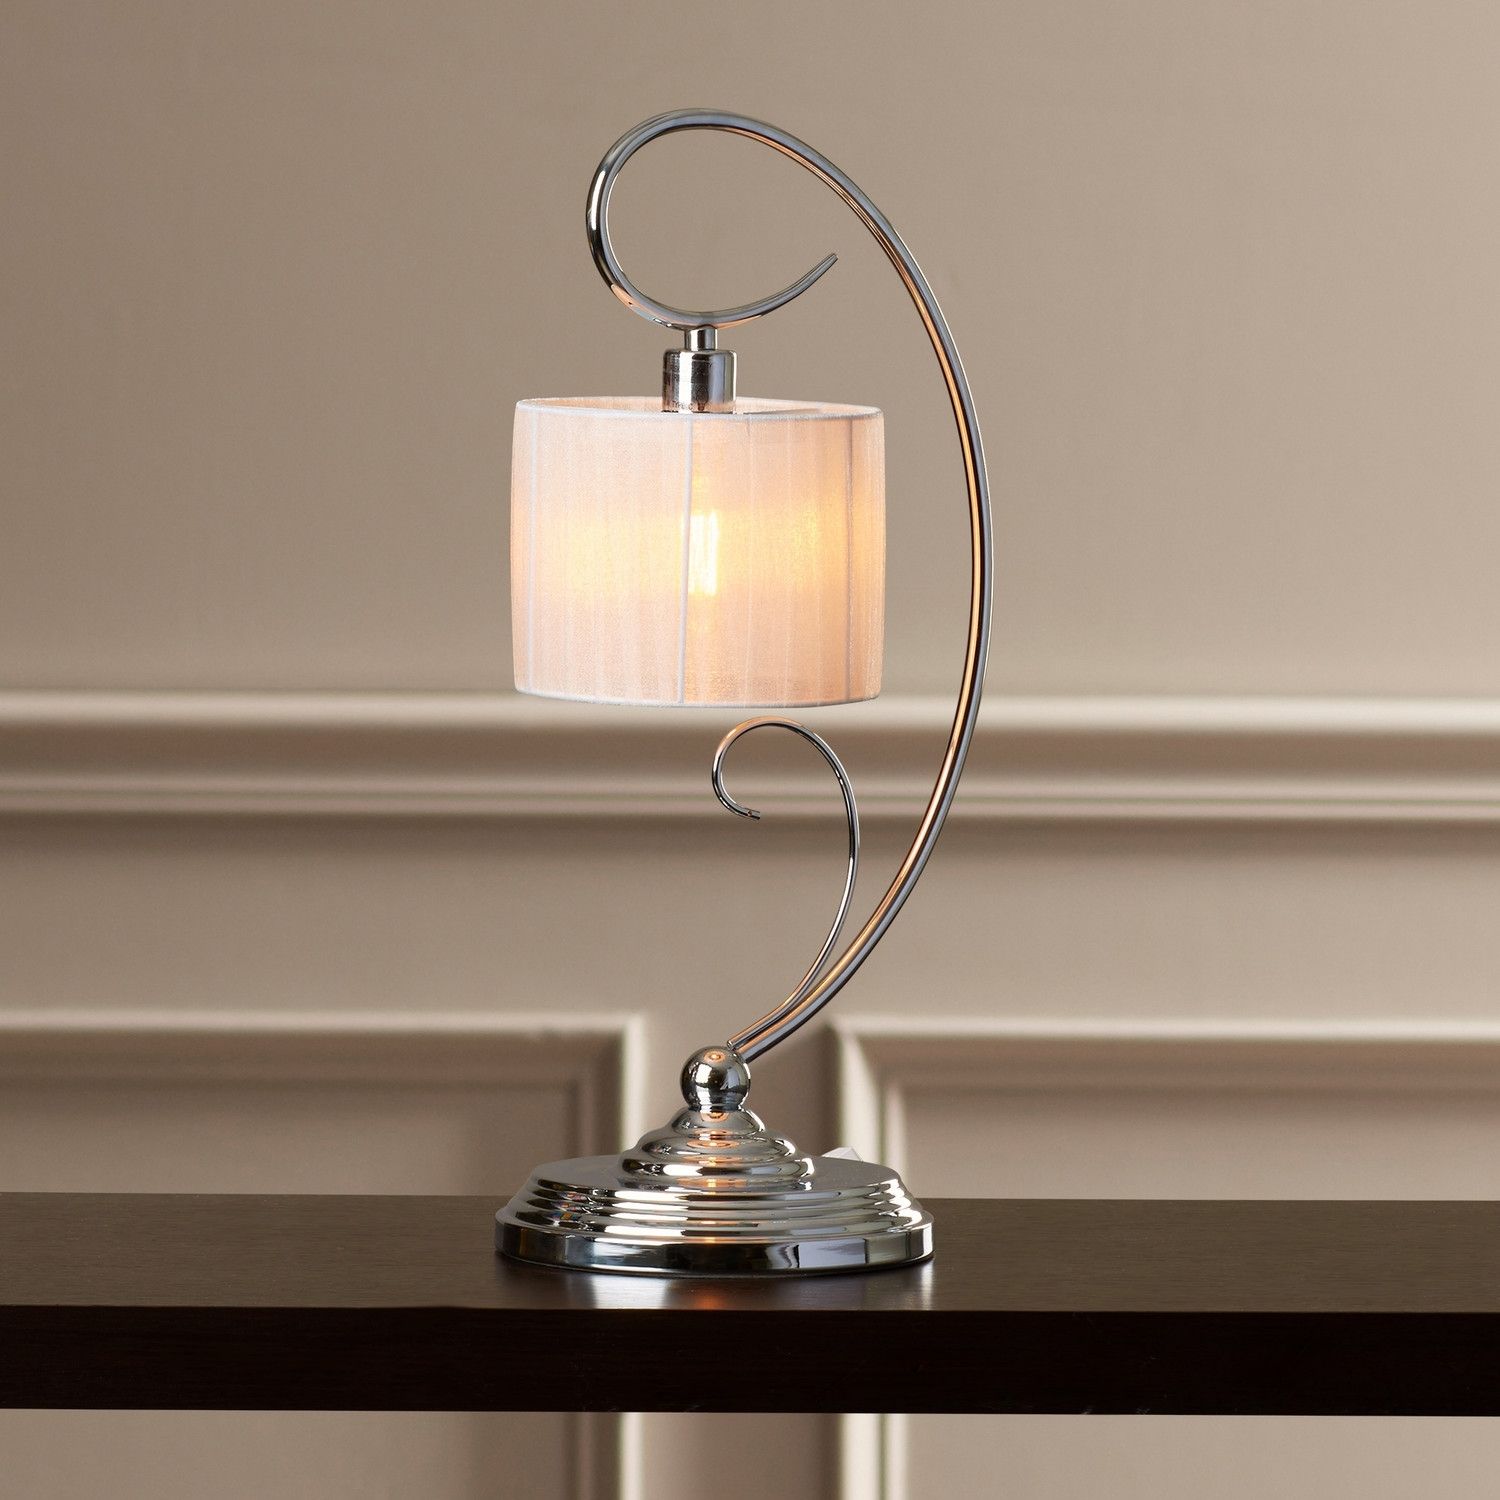 Lamp : Metal Lamp Shades For Table Lamps Inspirational New In Inside Table Lamps For Modern Living Room (View 6 of 15)